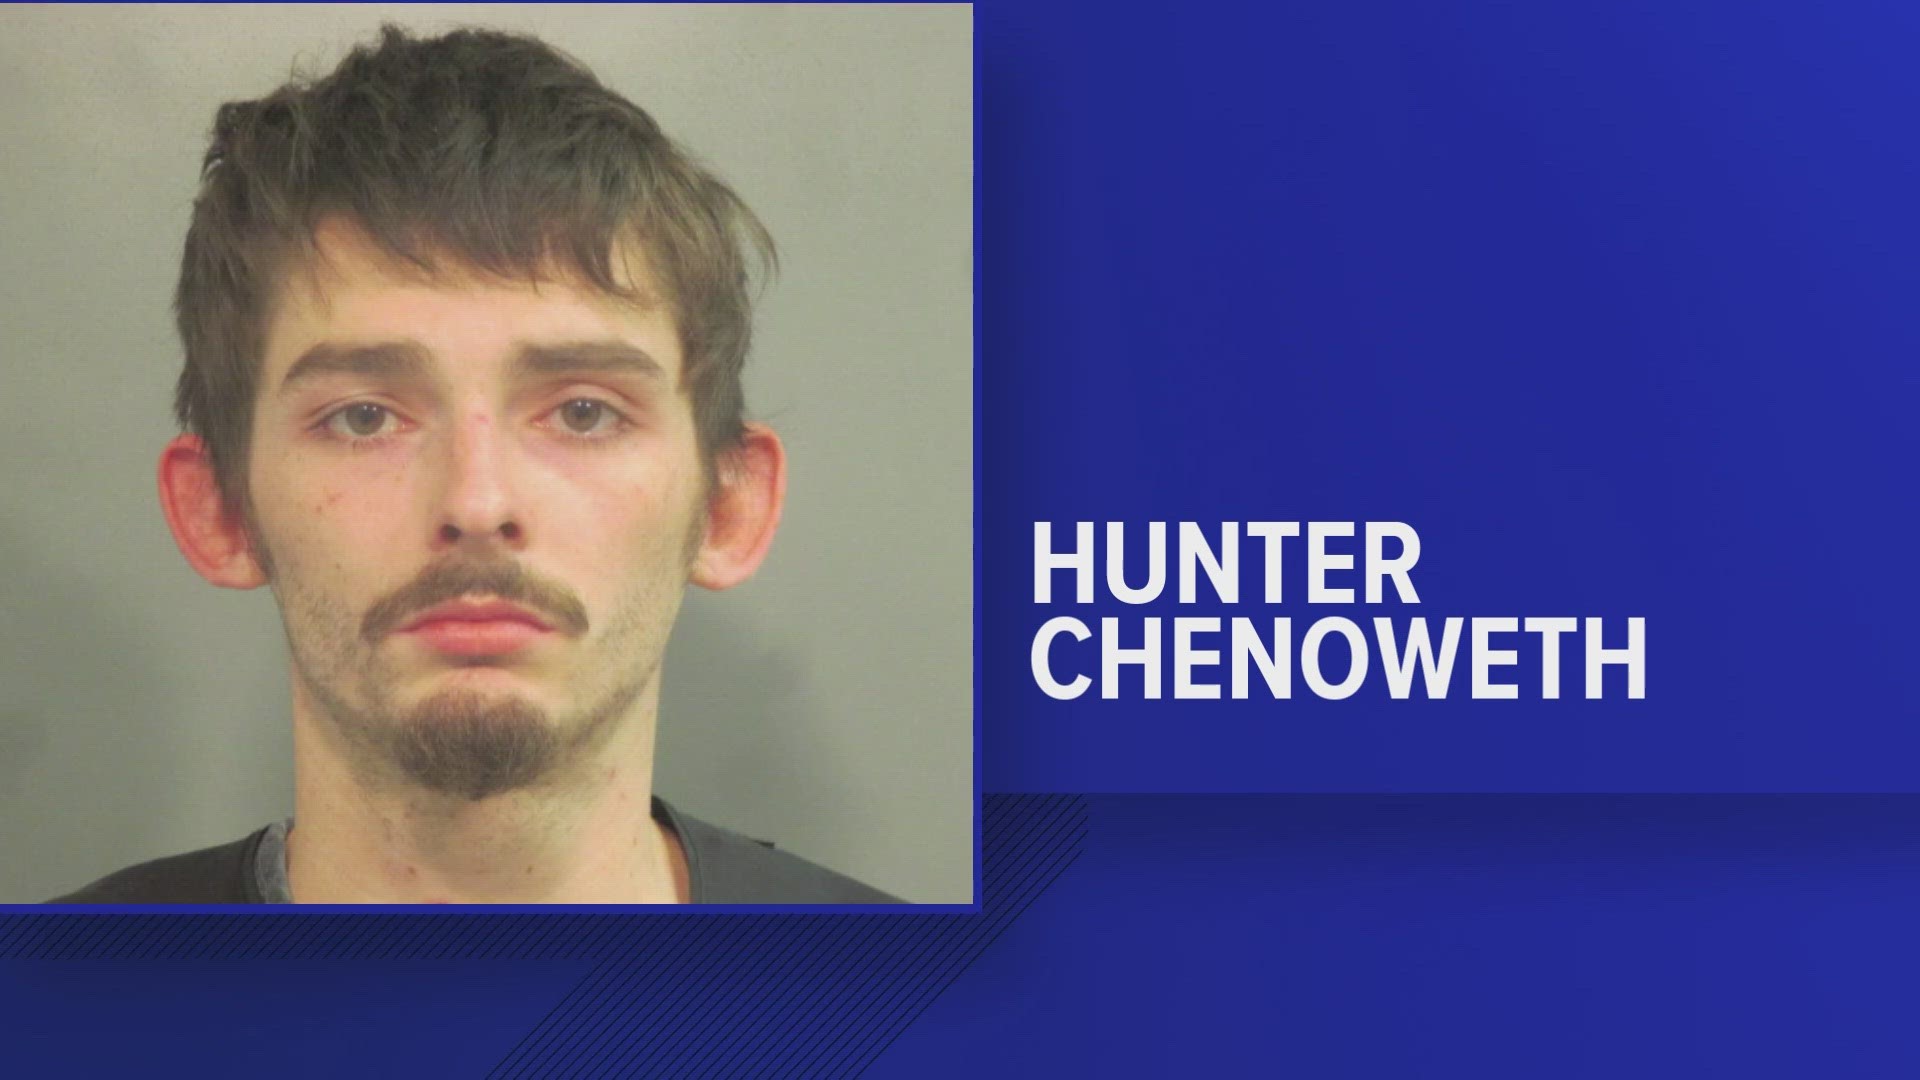 The trial has been delayed for Hunter Chenoweth who is accused of killing three family members in February 2021 near the Wesley community in Madison County.